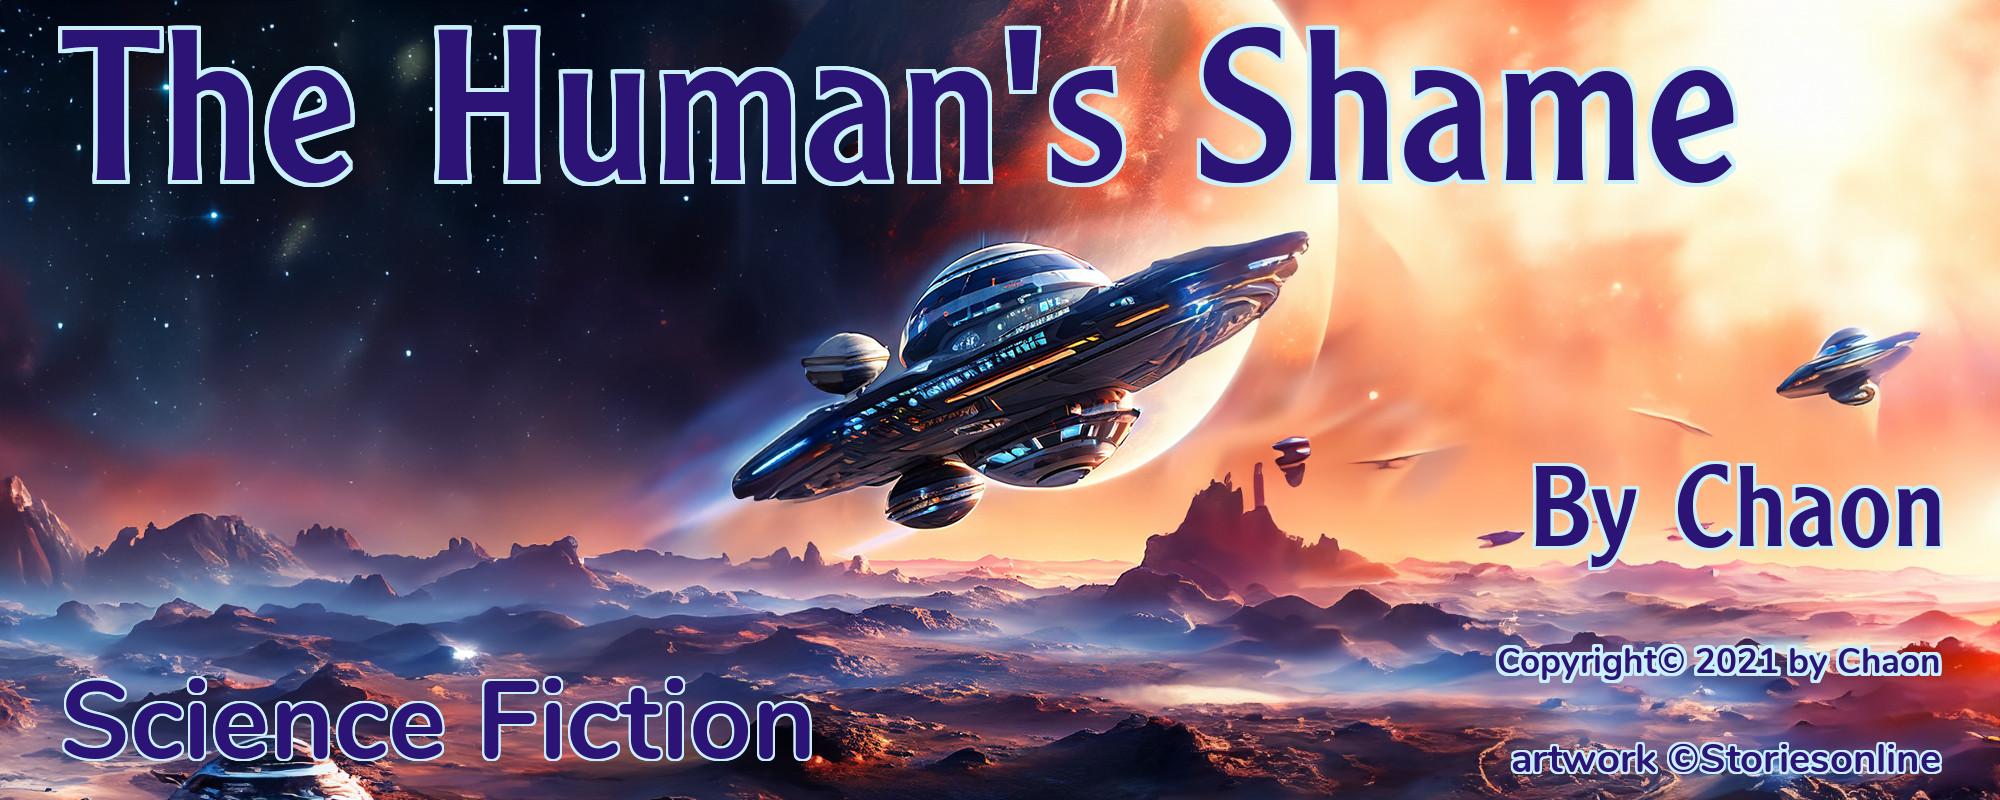 The Human's Shame - Cover